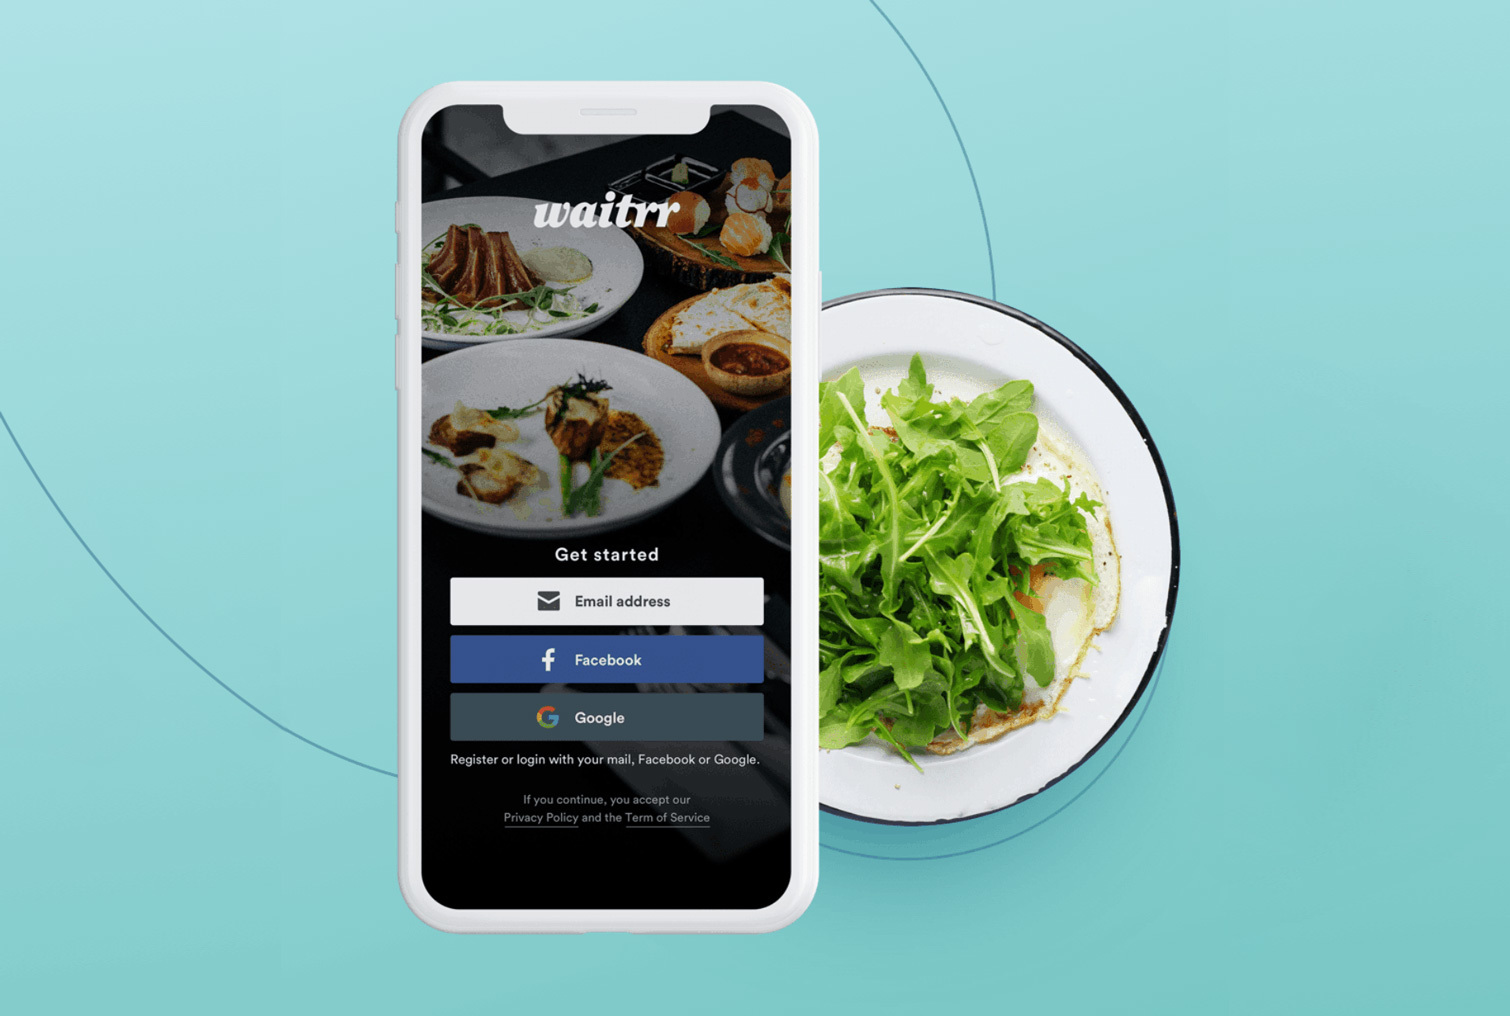 A mobile payment & ordering platform that disrupts F&B market in Singapore